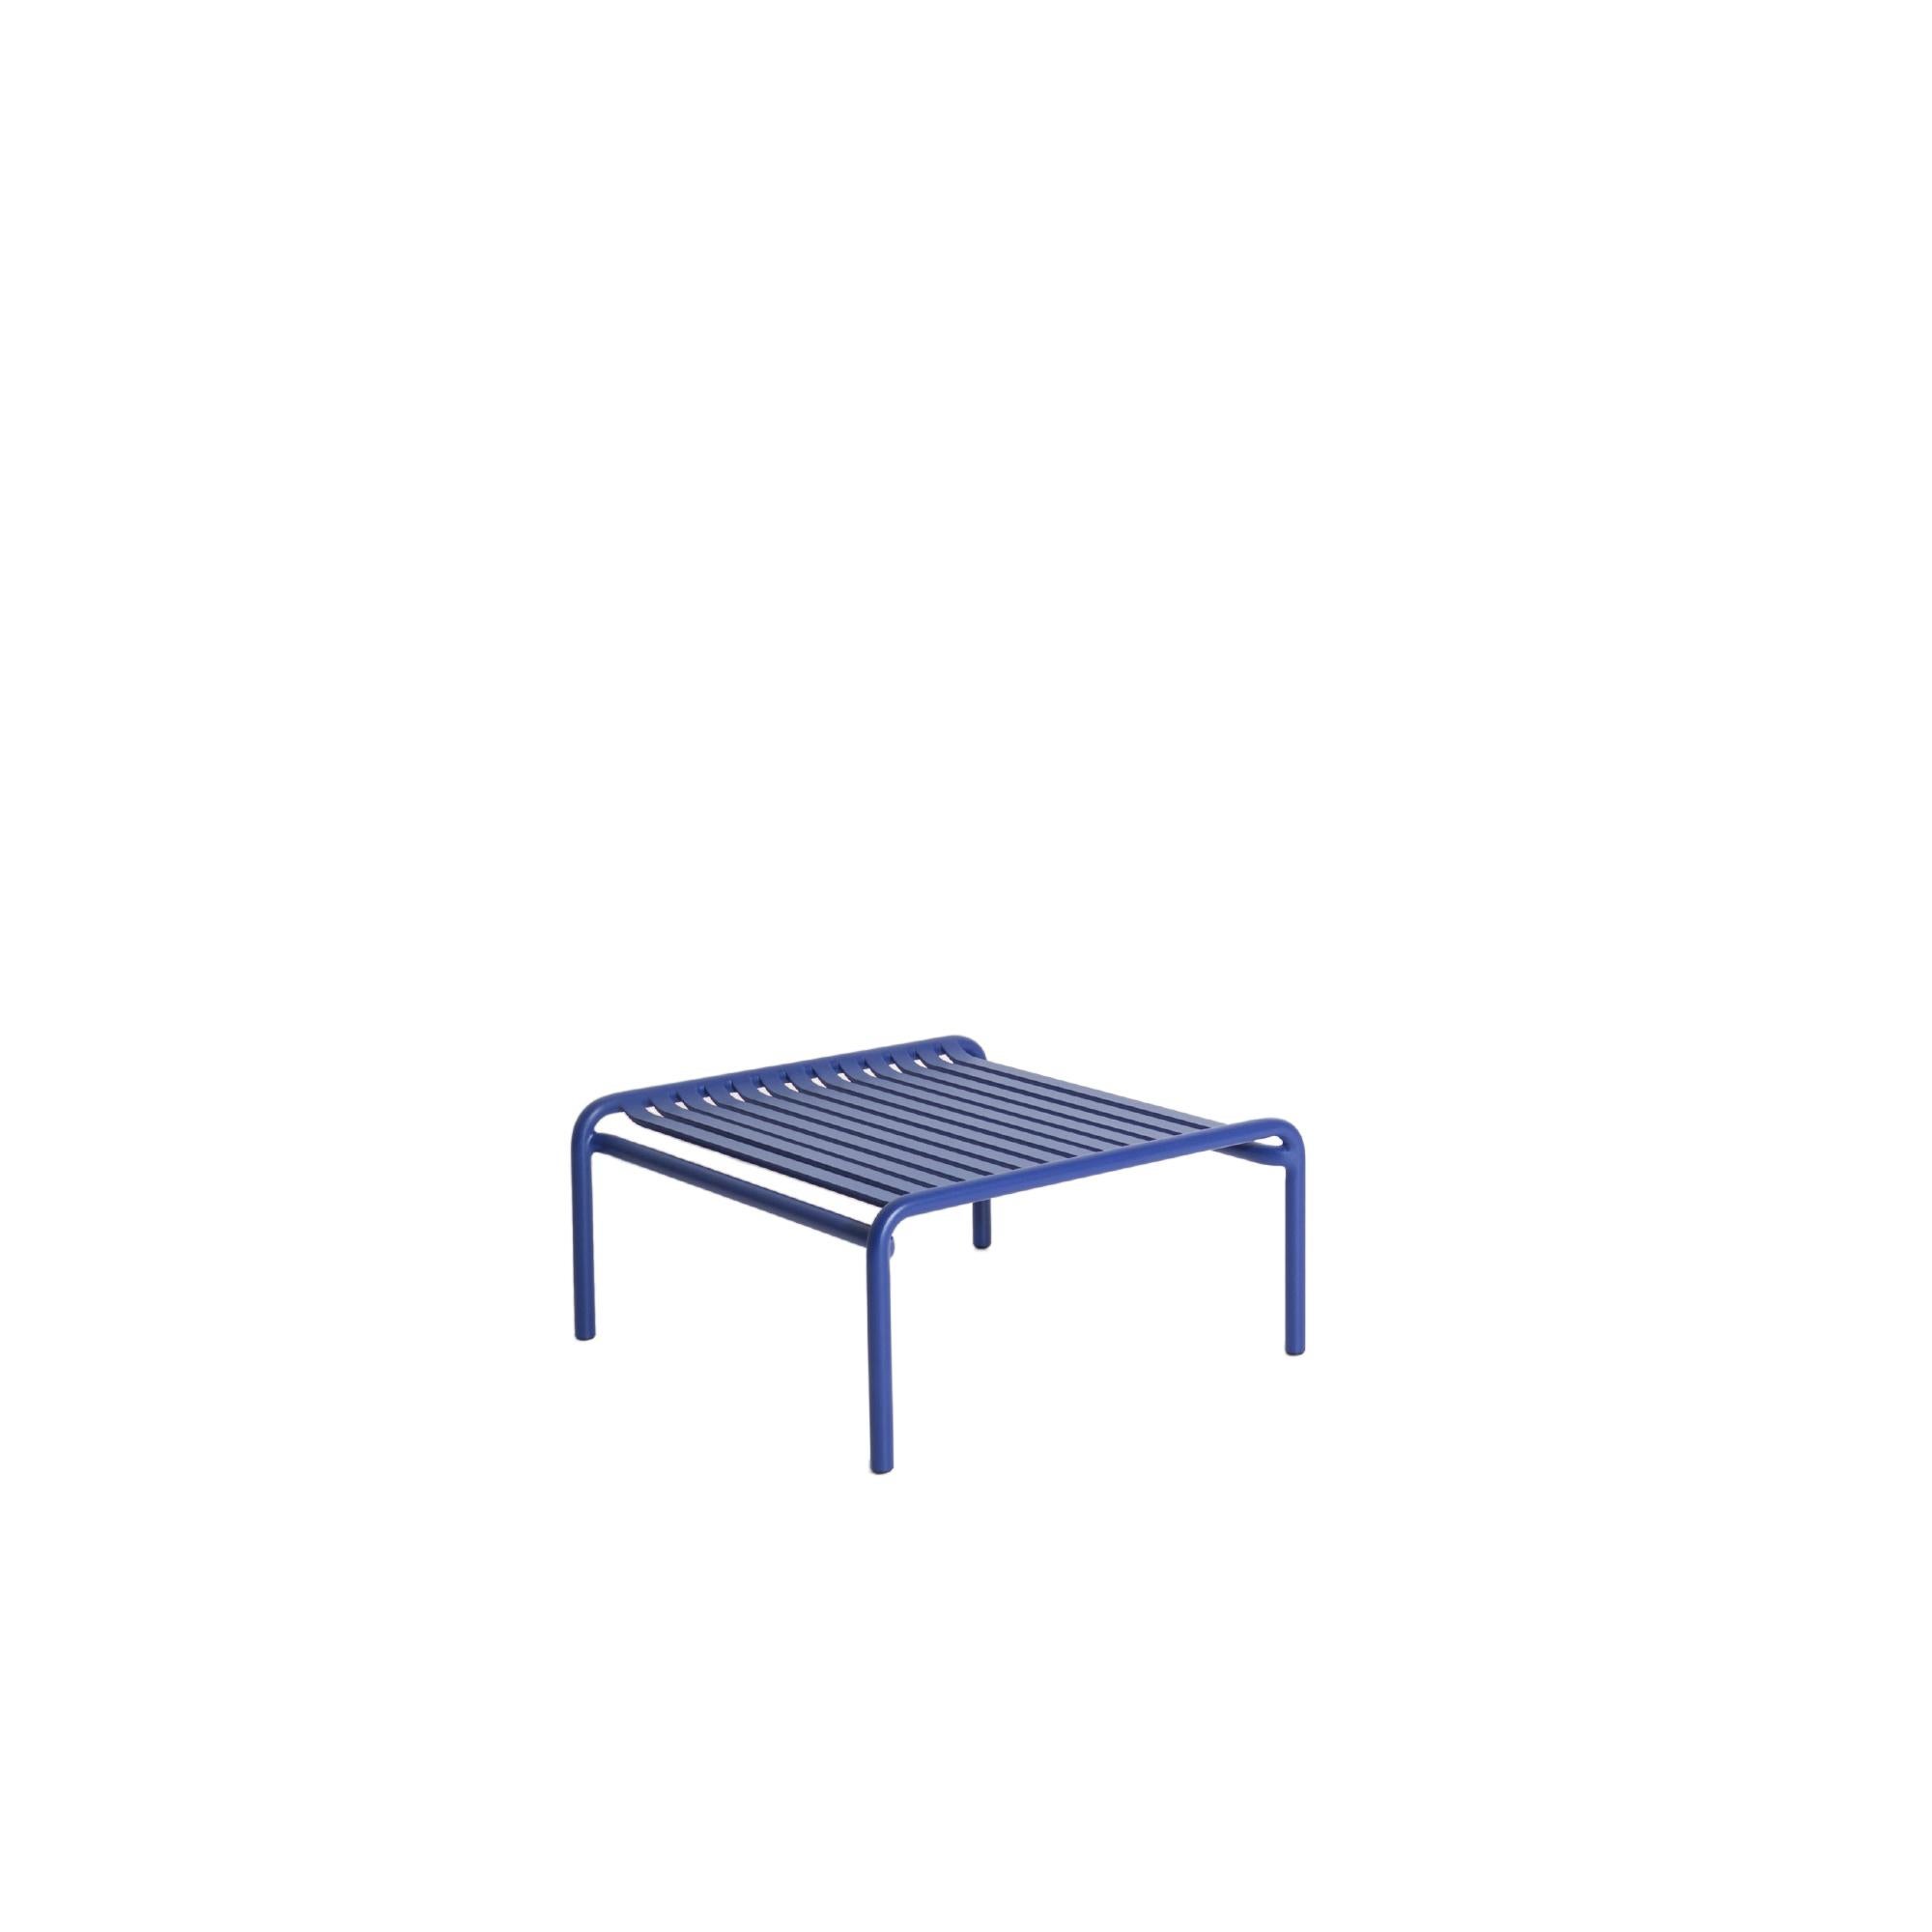 Petite Friture Week-End Coffee Table in Blue Aluminium by Studio BrichetZiegler, 2017

The week-end collection is a full range of outdoor furniture, in aluminium grained epoxy paint, matt finish, that includes 18 functions and 8 colours for the